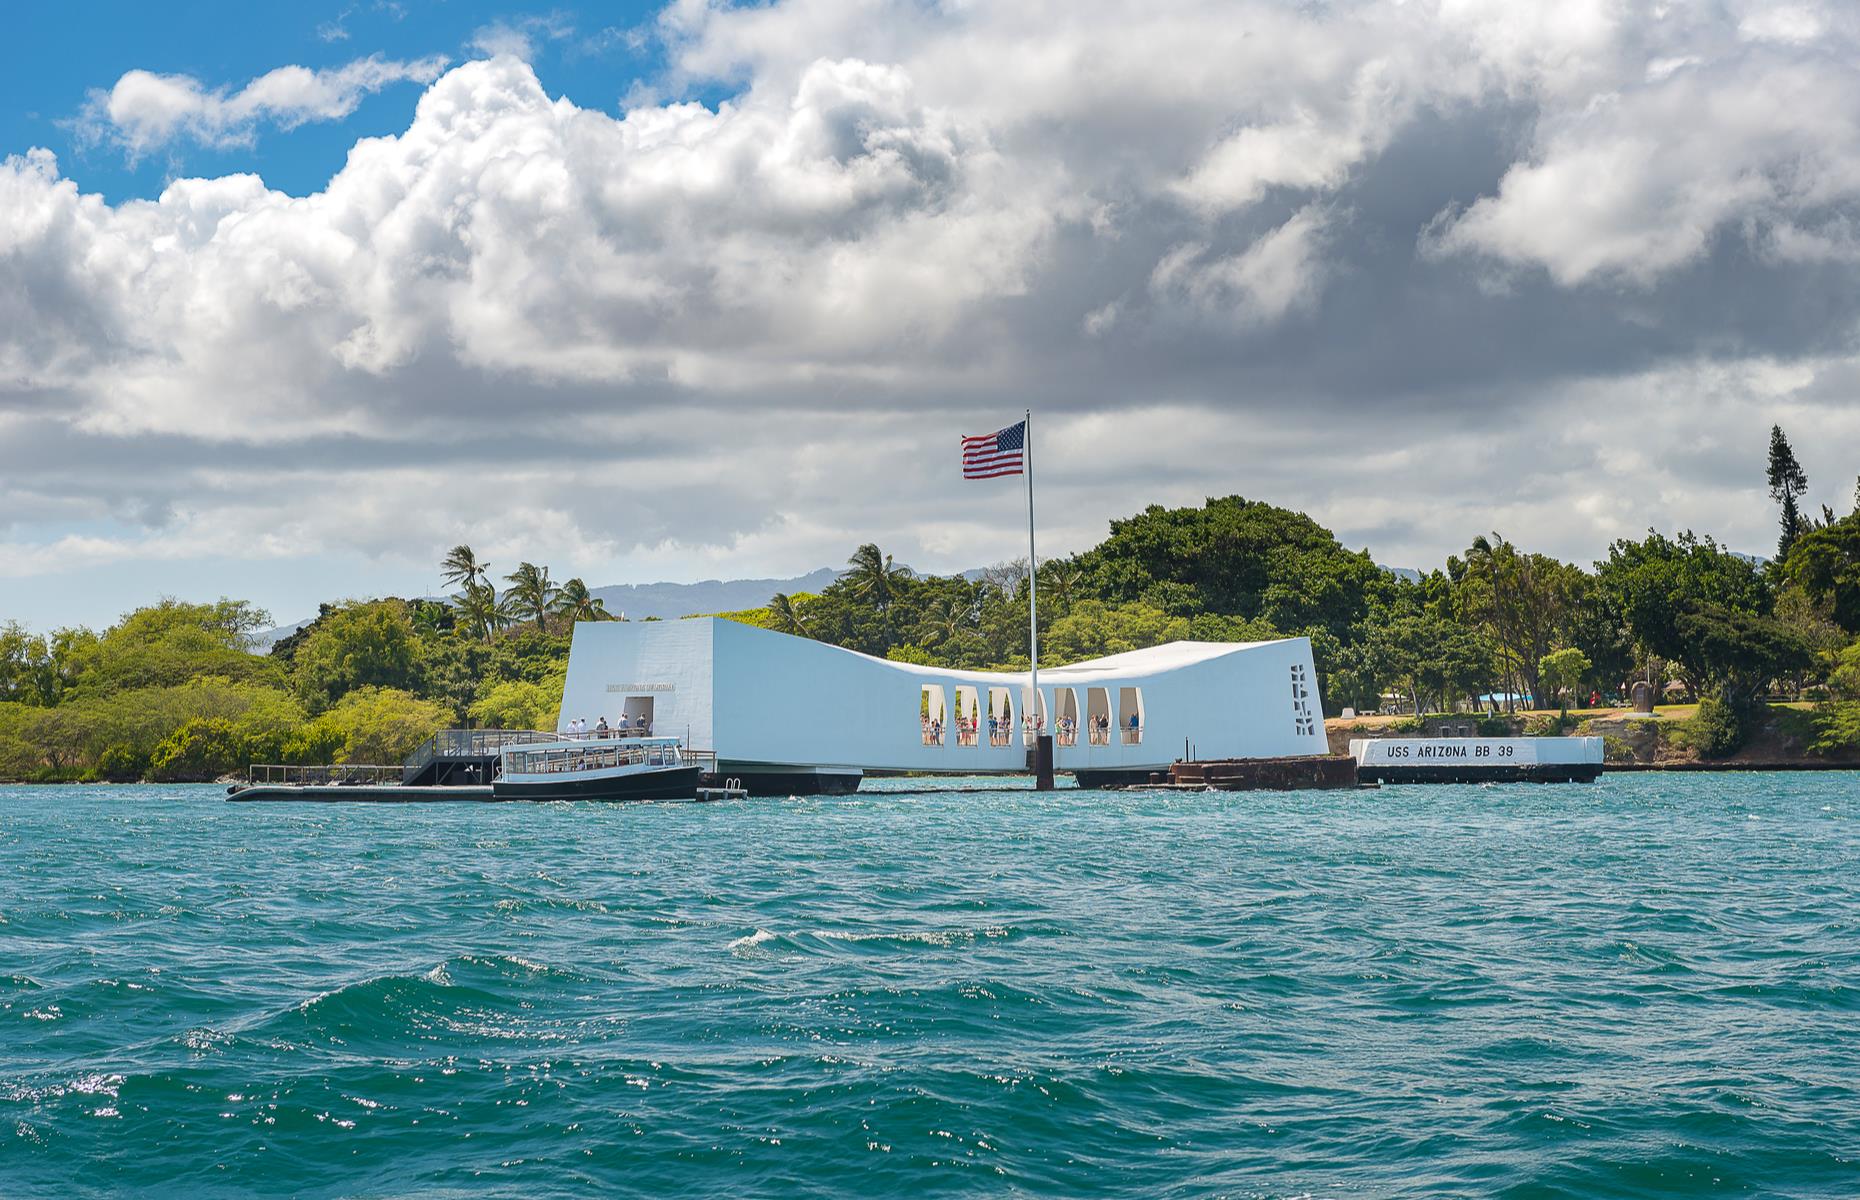 <p>The <a href="https://www.nps.gov/perl/index.htm">Pearl Harbor National Memorial</a> offers visitors a chance to reflect on a poignant part of US military history: the Japanese attack on Pearl Harbor in December 1941. Take a boat from the visitor center to the striking white USS Arizona memorial. The structure is built over the sunken remains of the attacked USS Arizona battleship, on which more than 2,000 people died. Nearby, the <a href="https://www.pearlharboraviationmuseum.org">Pearl Harbor Aviation Museum</a> is also worth a visit.</p>